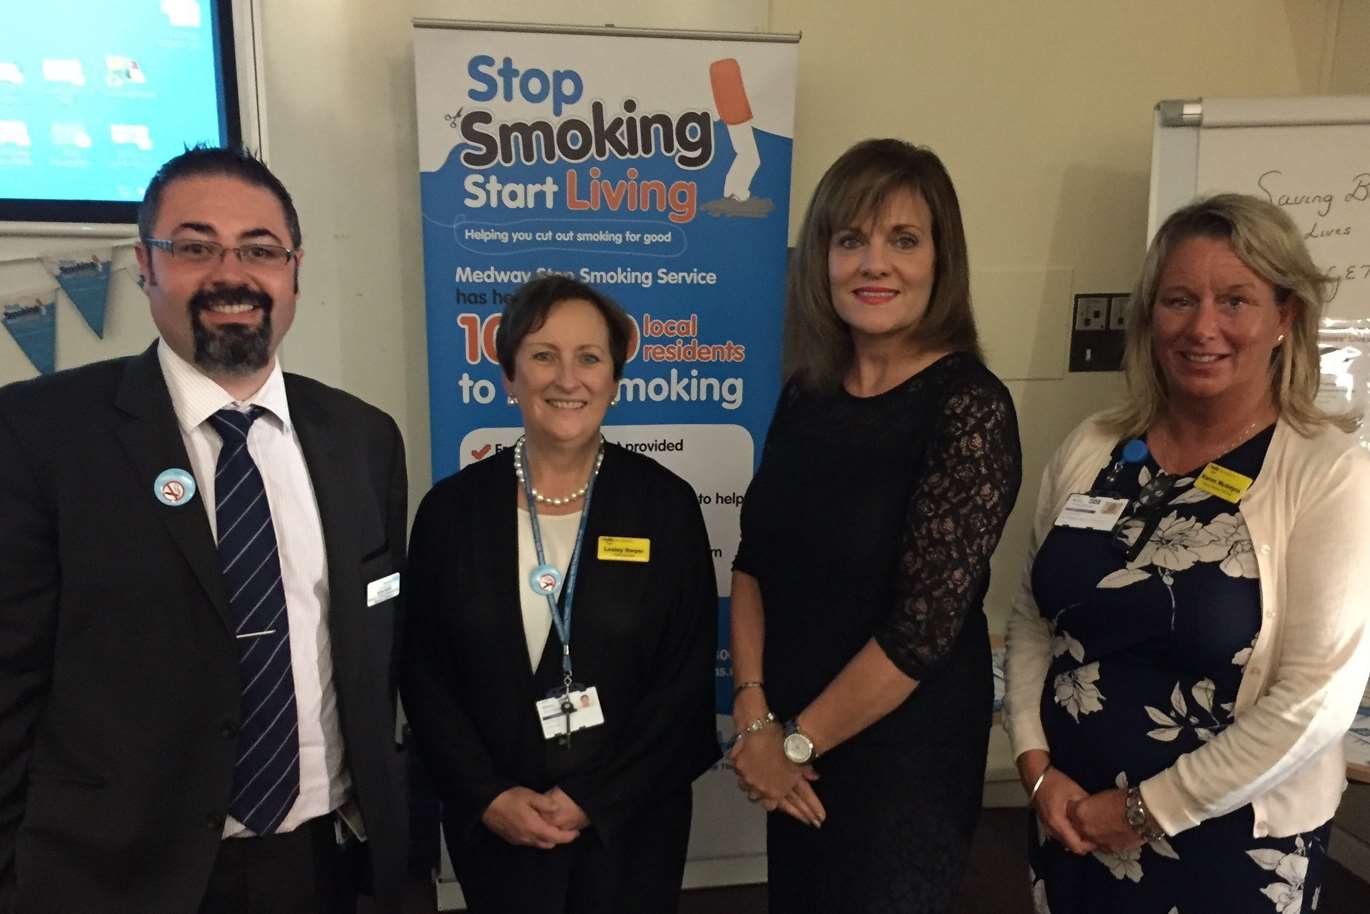 Saving Babies Lives - James Lowell, hospital Chief Executive Lesley Dwyer, Lisa Fendall from BBC Three's Misbehaving Mums, and Karen McIntyre